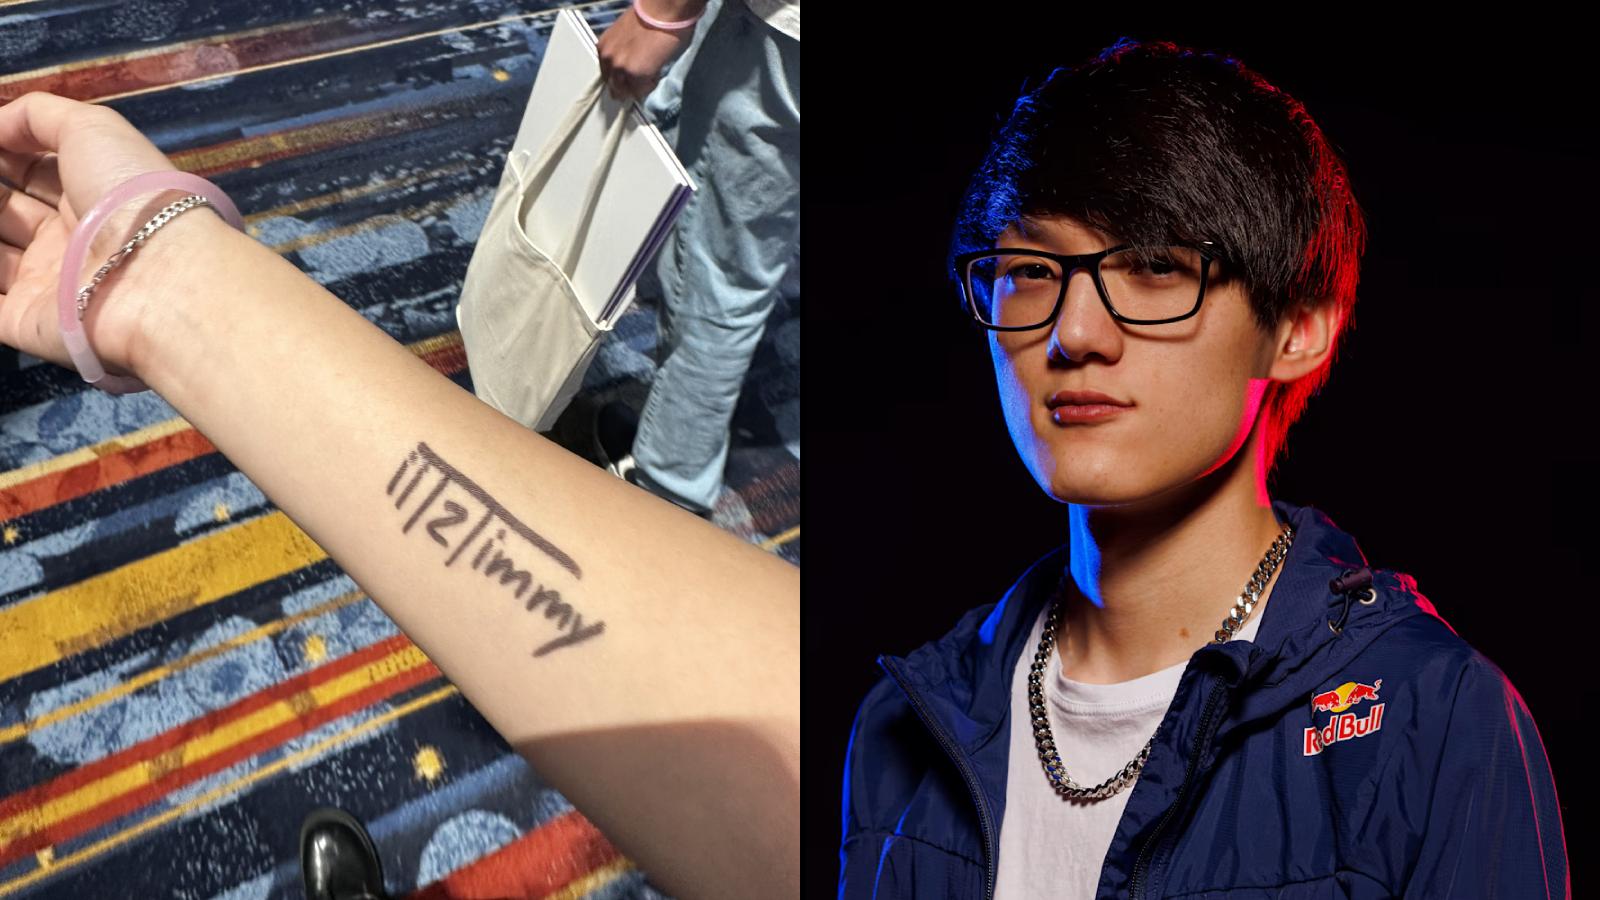 iiTzTimmy defends fan's arm tattoo of his name